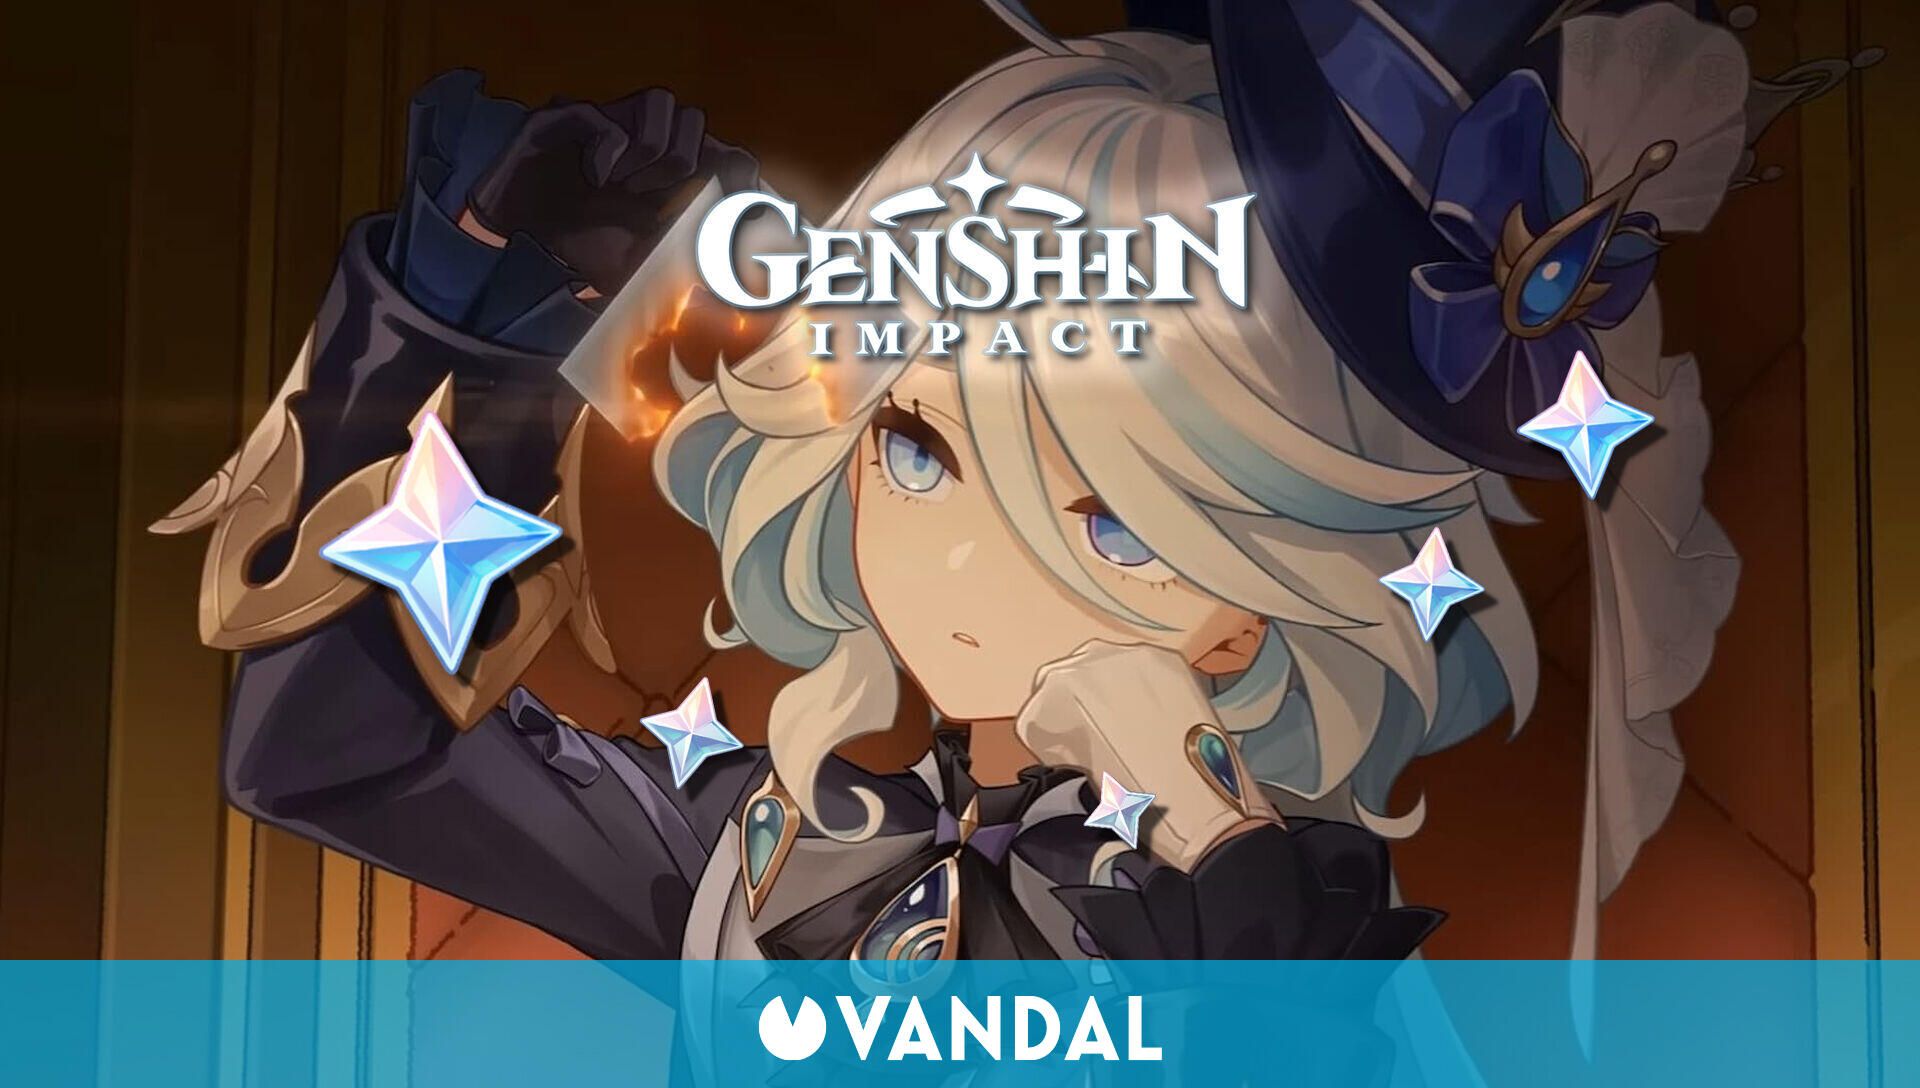 Genshin Impact: New code, limited-time free Protogems with v4.0